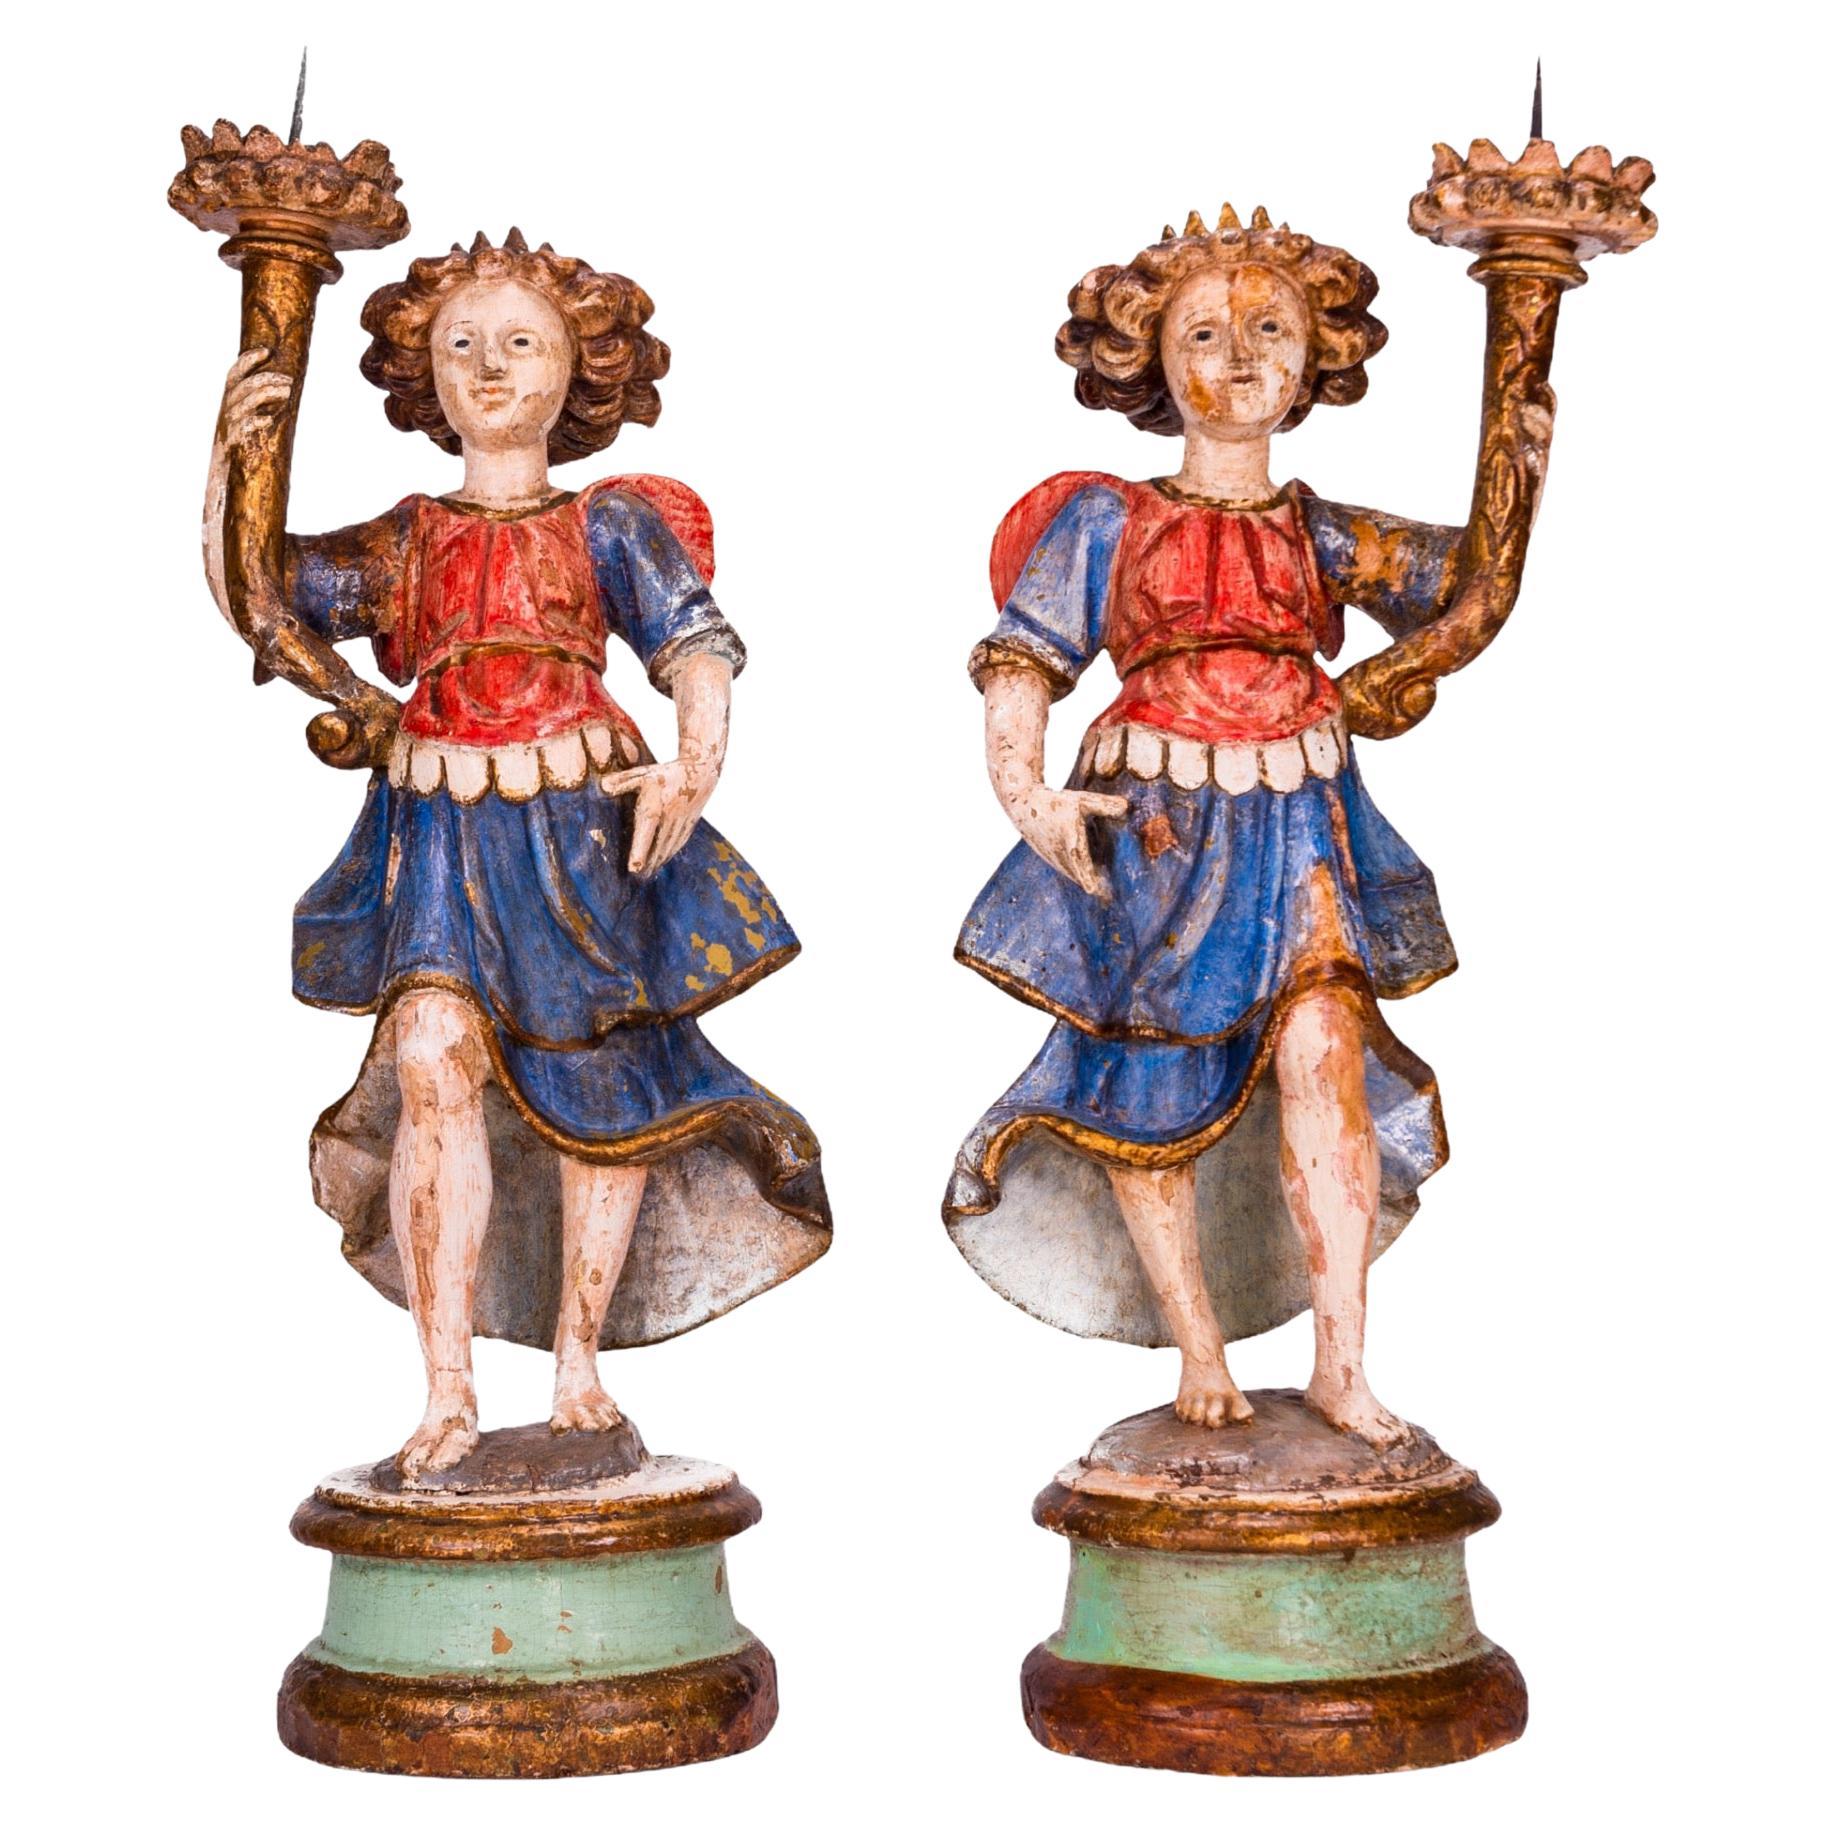 Candle Holders, 17th Century Italian Polychromed Carved Wood